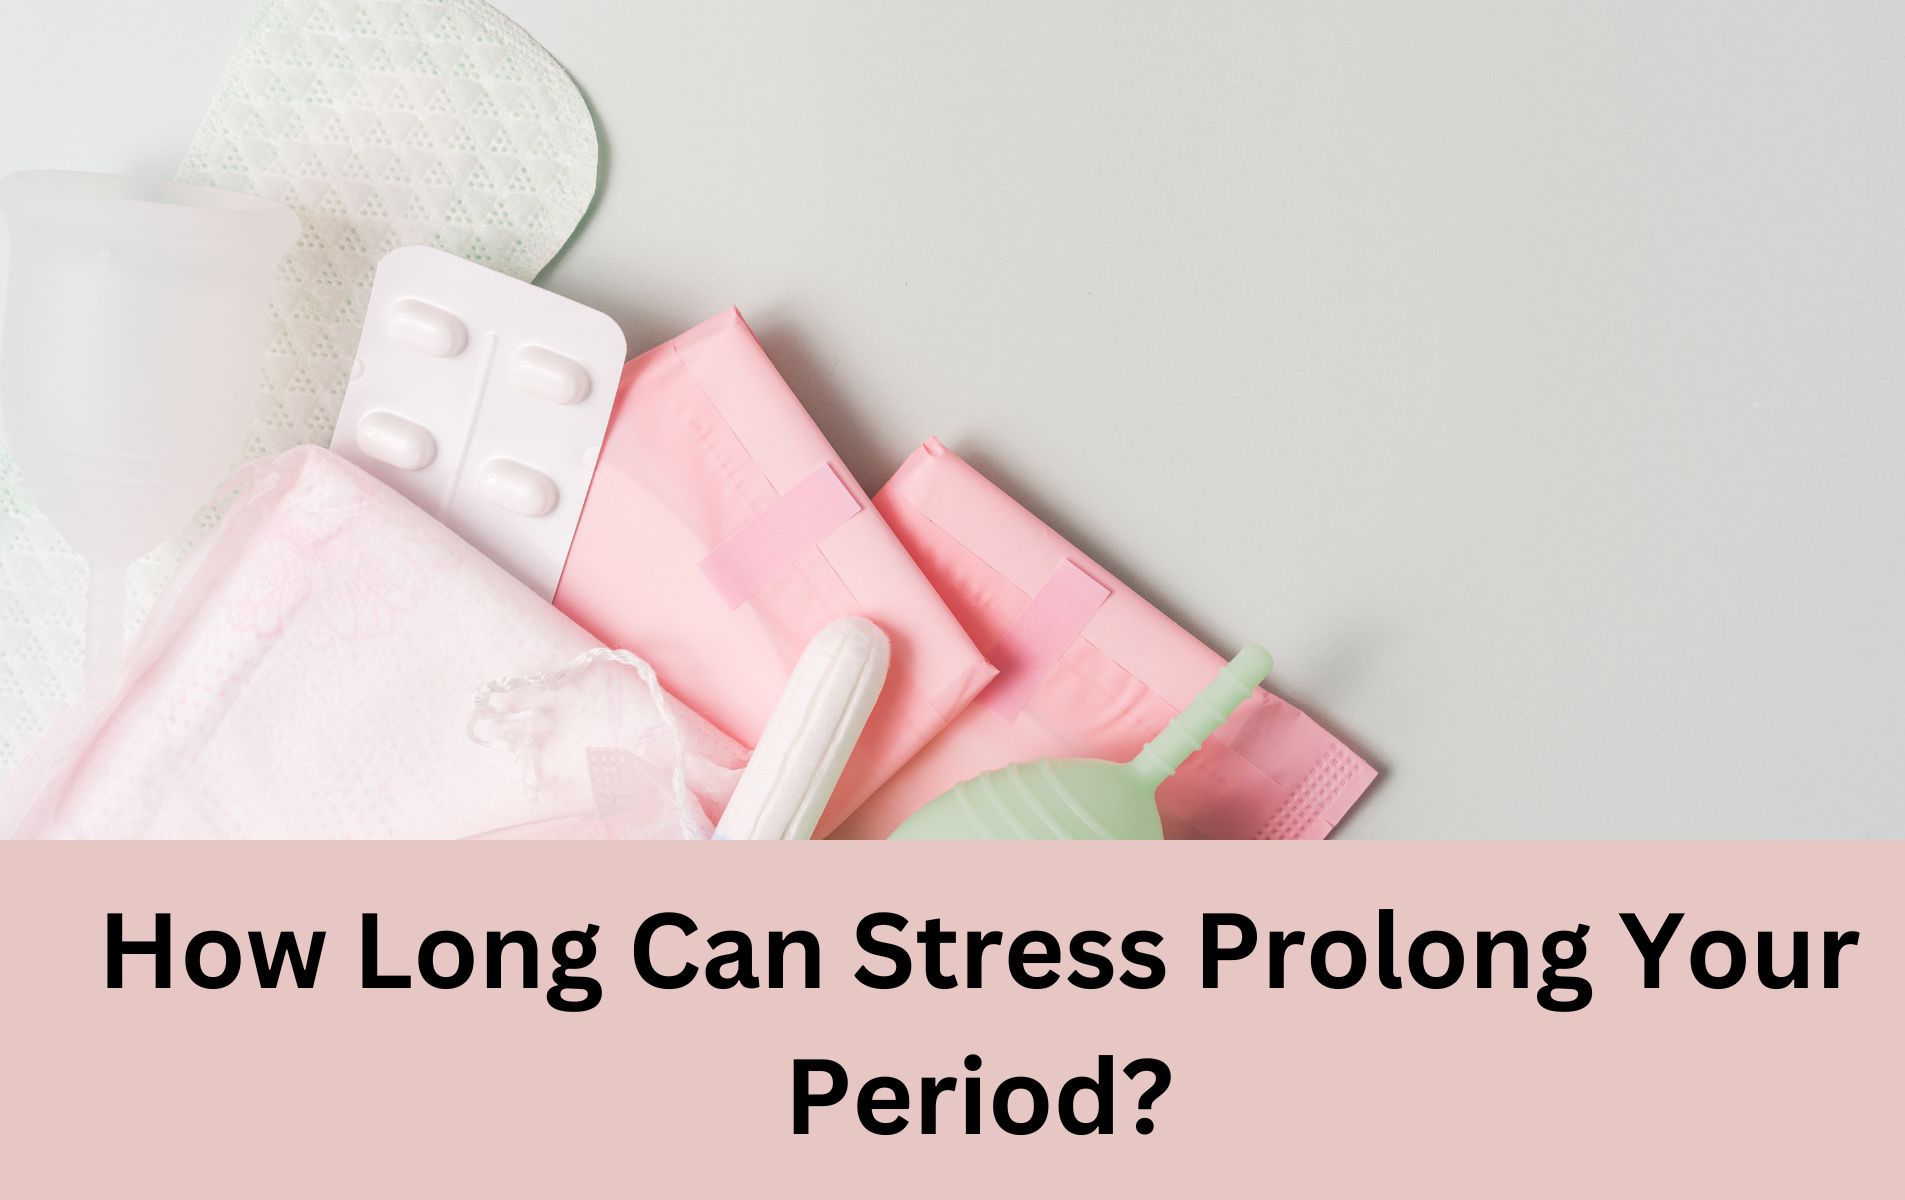 How Long Can Stress Prolong Your Period